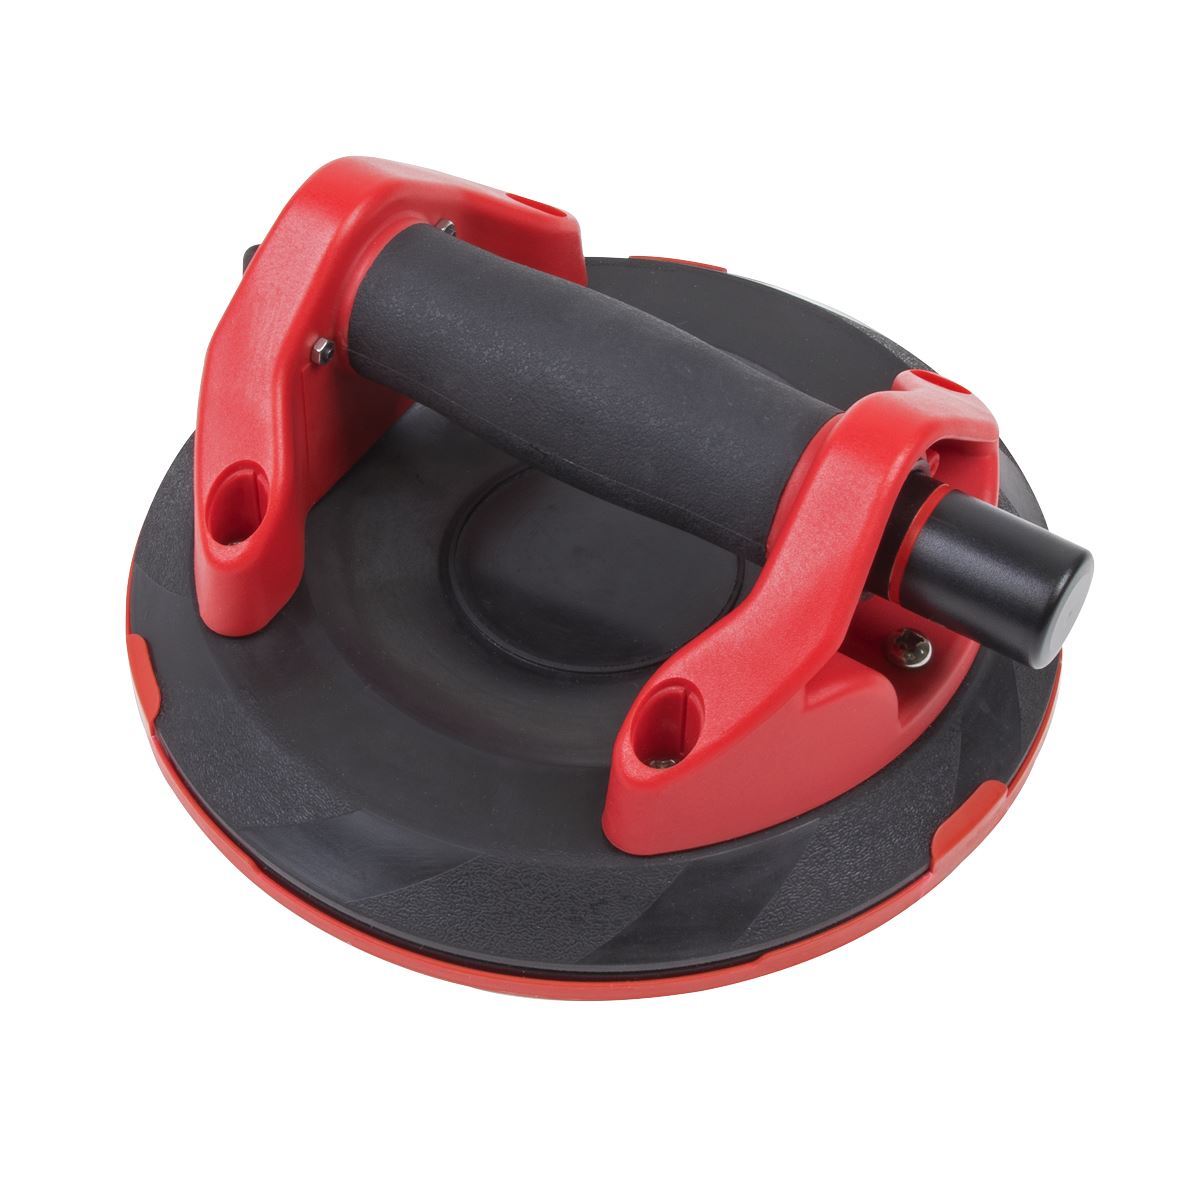 Sealey Heavy Lift Suction Cup with Vacuum Grip Indicator